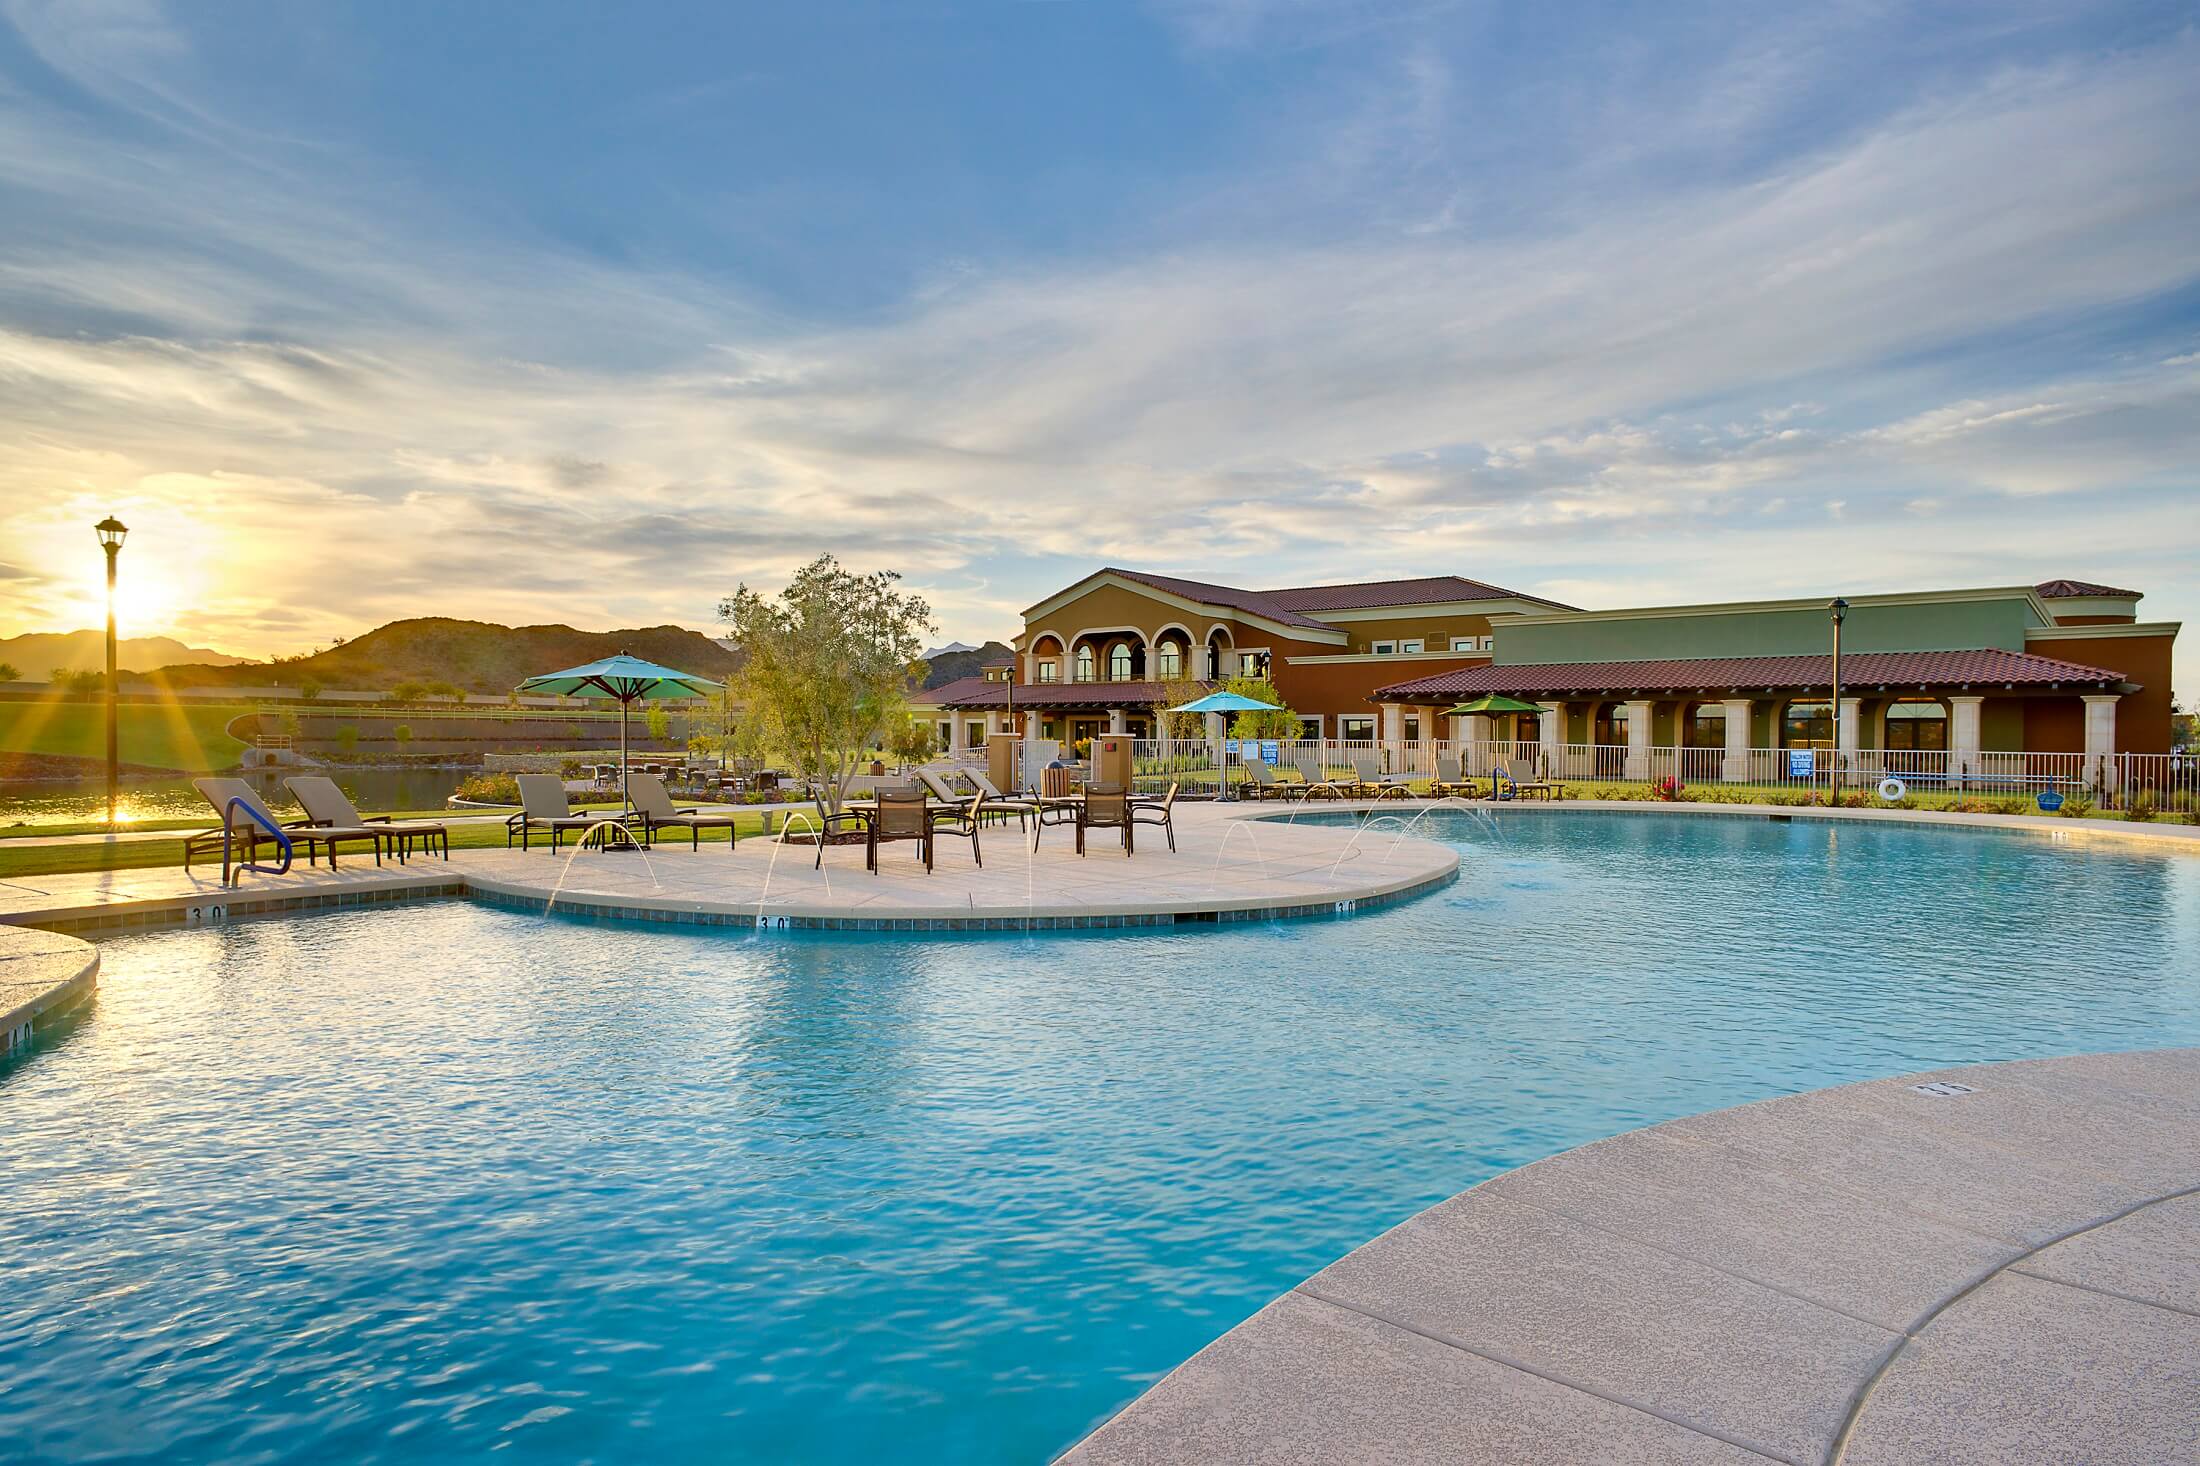 There are multiple resort-style pools at Canta Mia a Phoenix 55+ community